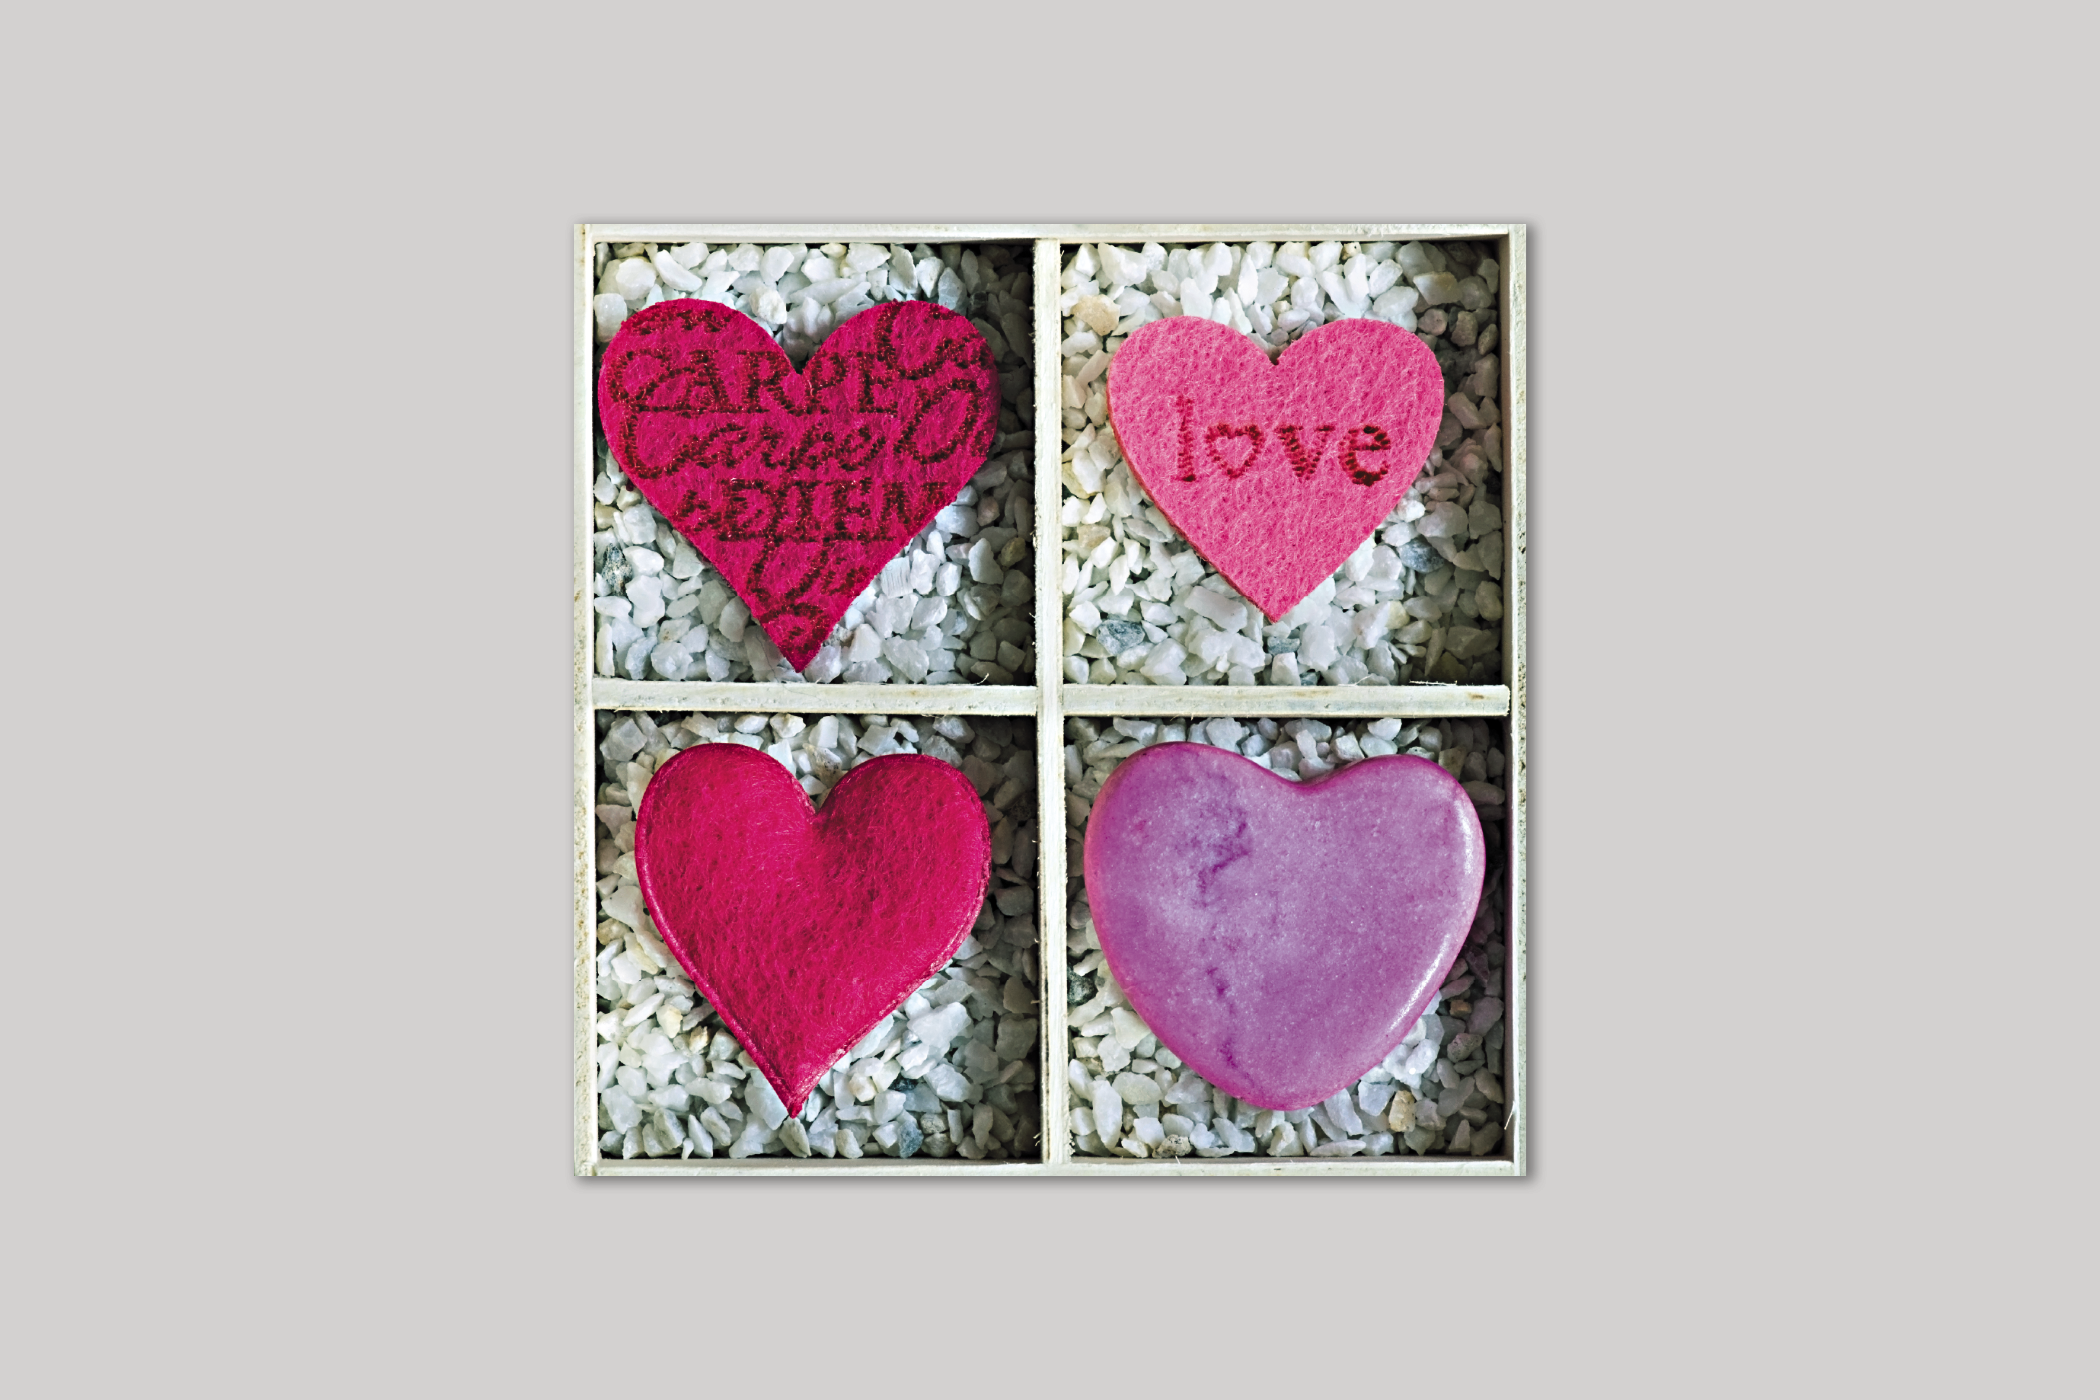 Love Hearts from Exposure range of photographic cards by Icon.